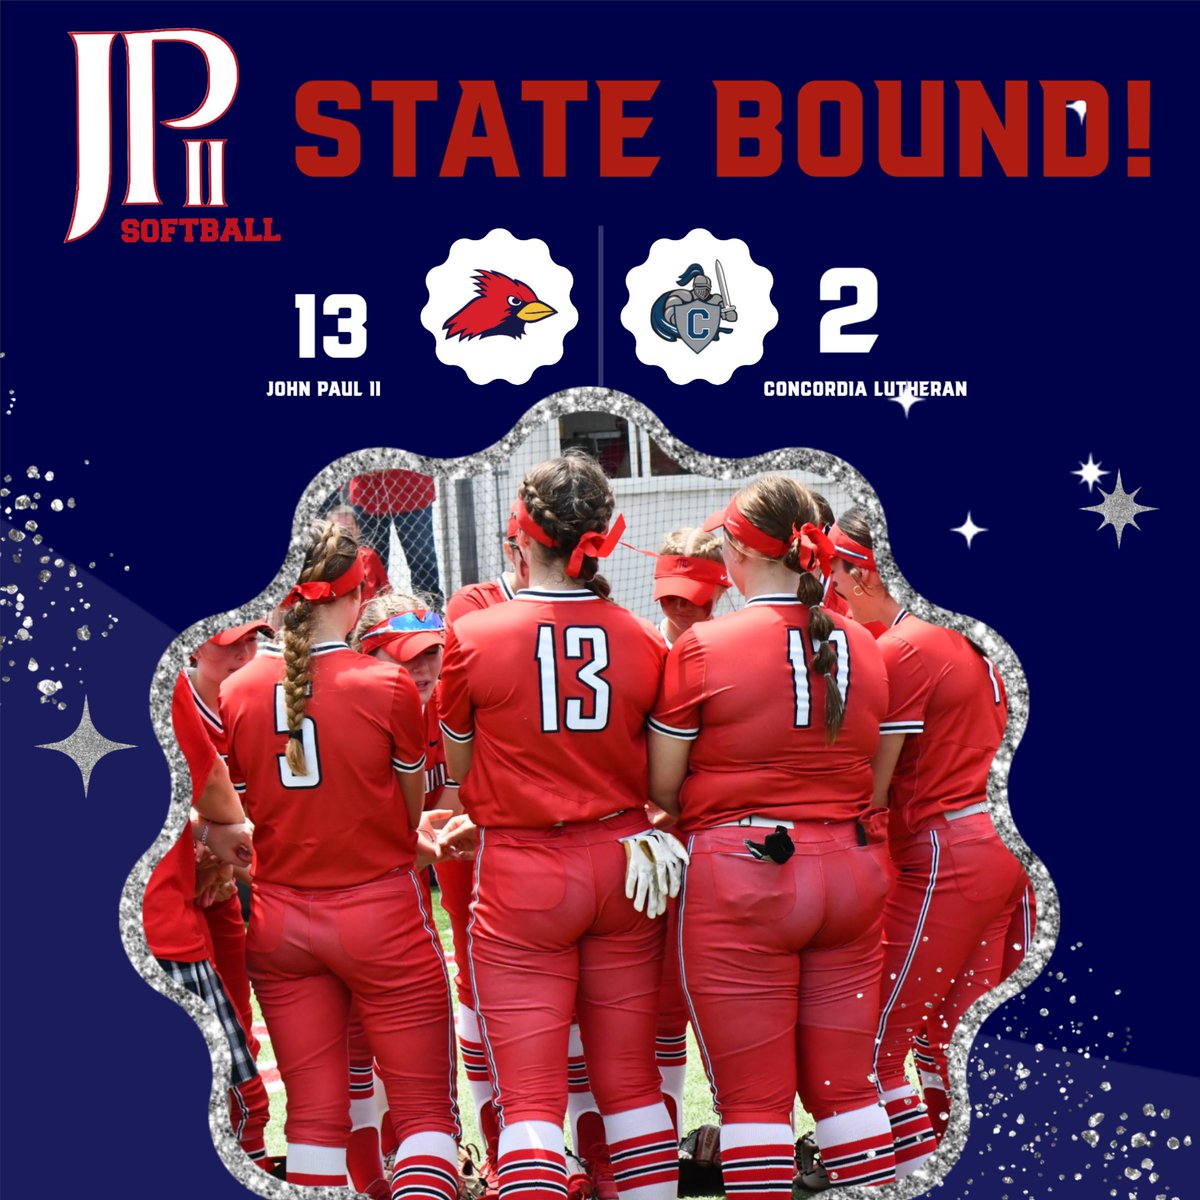 Two home runs and two grand slams give the Cards a 13-2 win and they are headed back to the state tournament!! Congratulations Cardinals! @JPIIHS_SOFTBALL